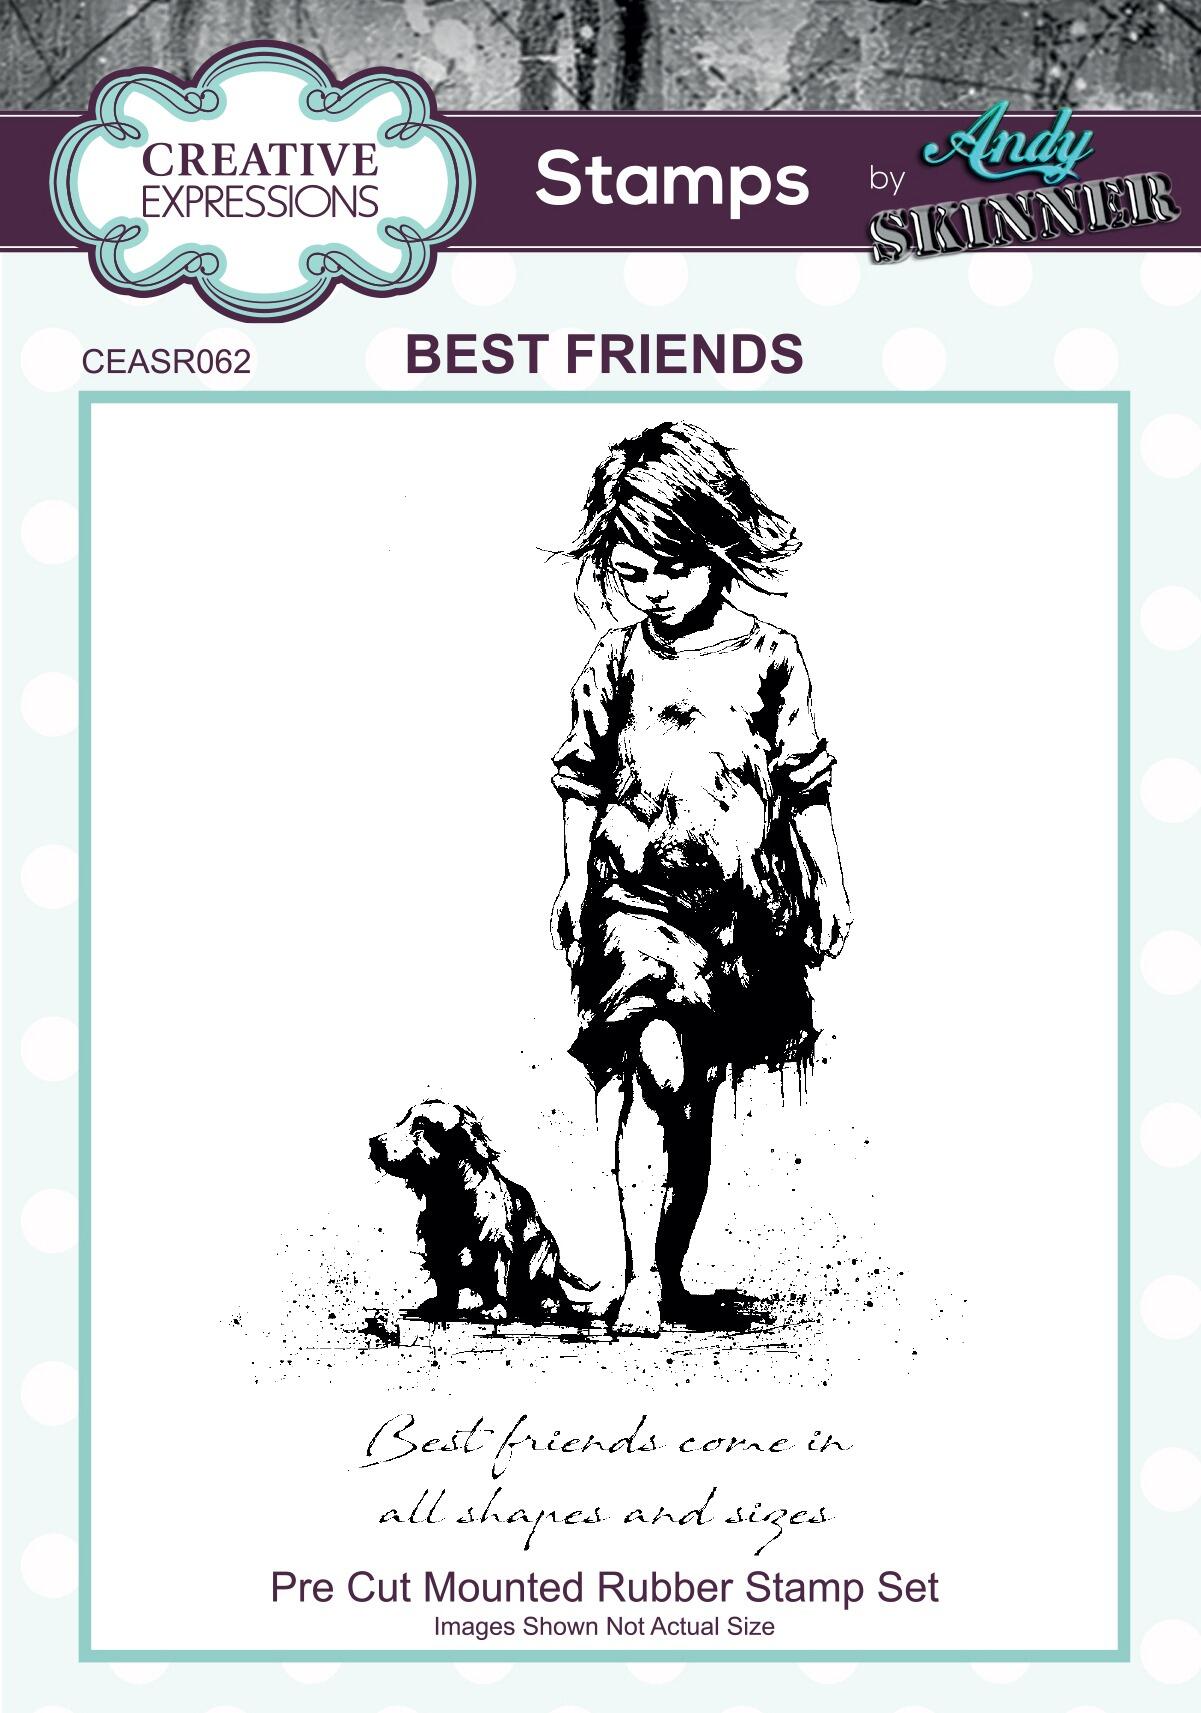 Creative Expressions - Andy Skinner Best Friends 3.5 in x 5.25 in Rubber  Stamp - CEASR062